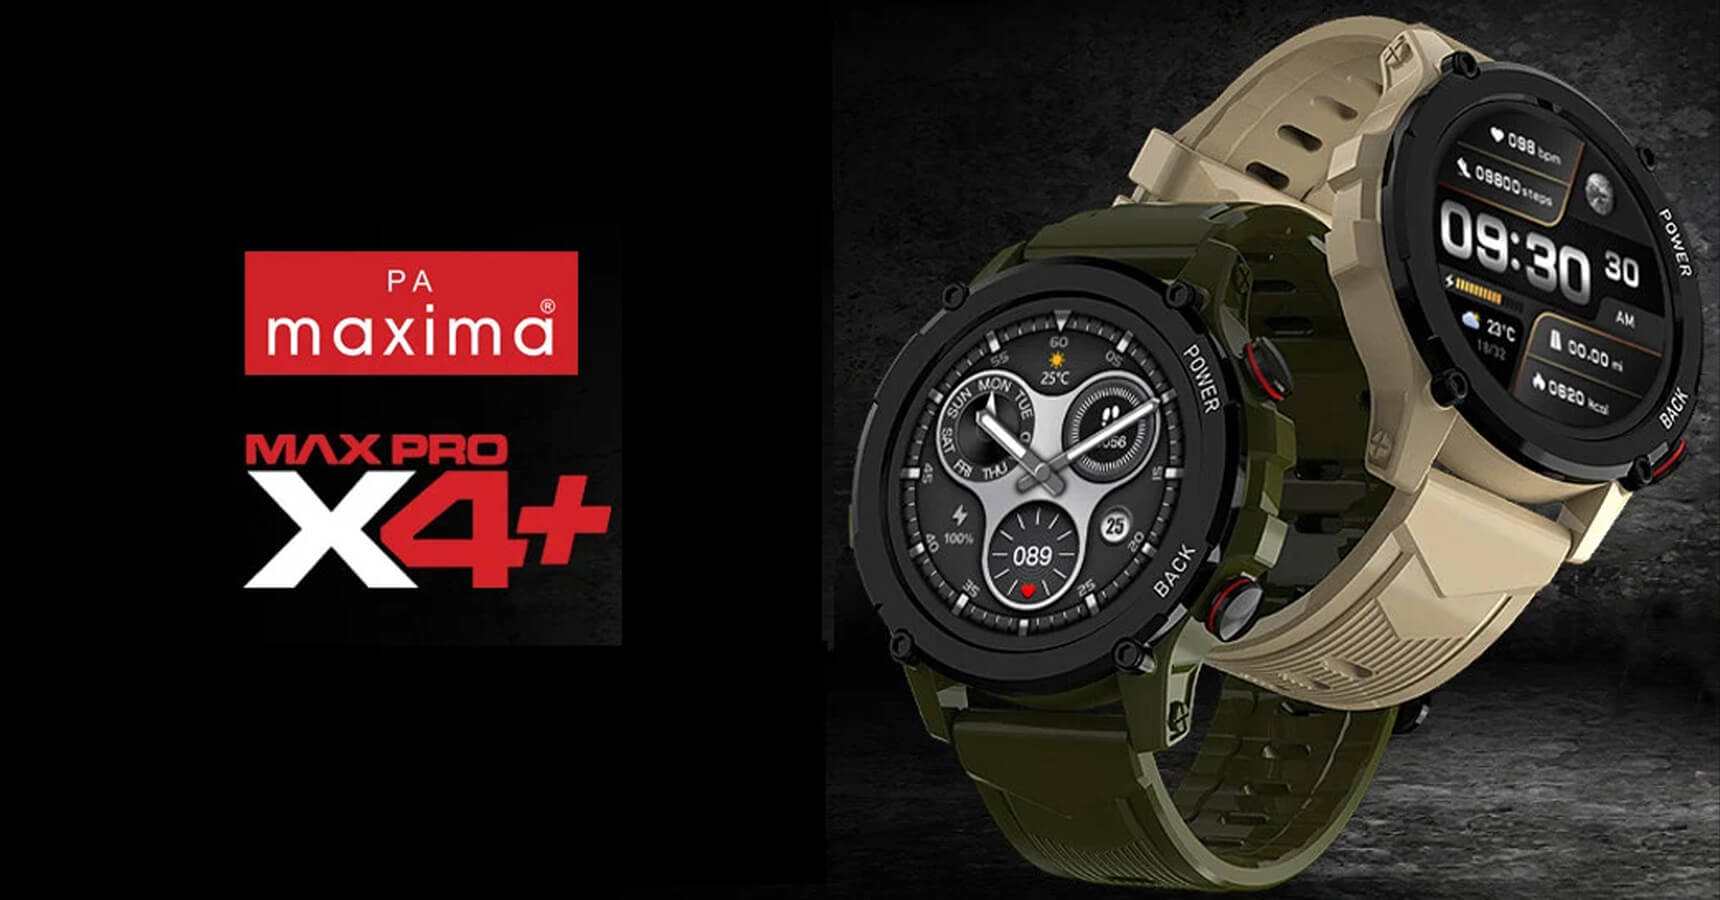 Maxima Max Pro X4 Plus Smartwatch launched